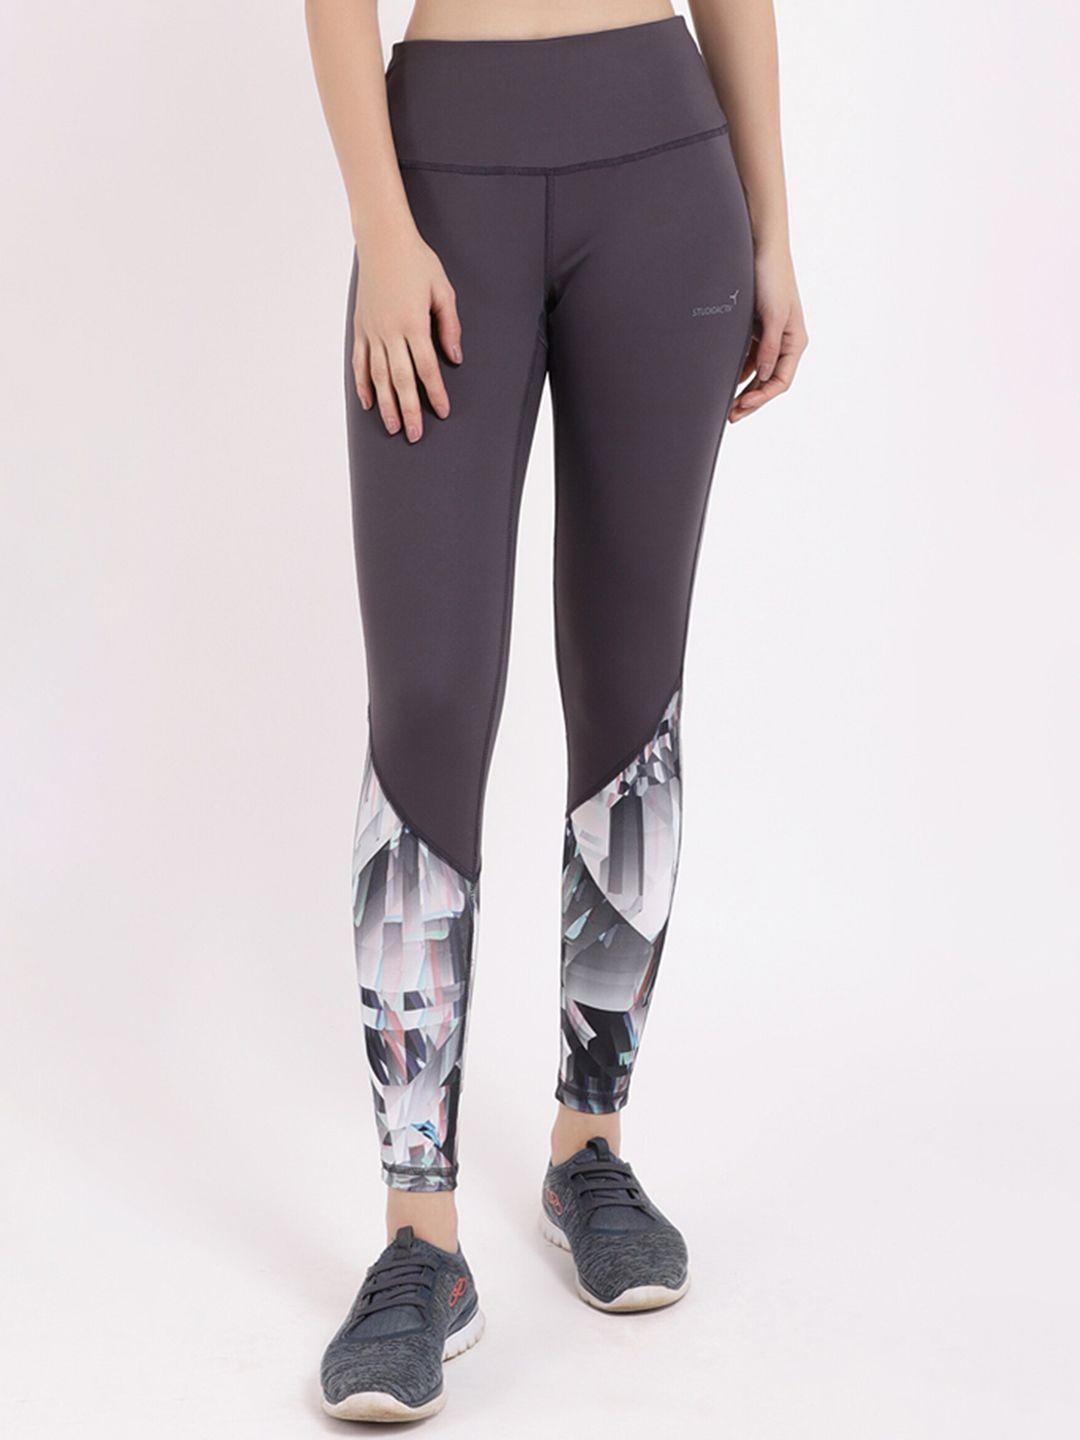 studioactiv women charcoal grey printed ankle-length tights